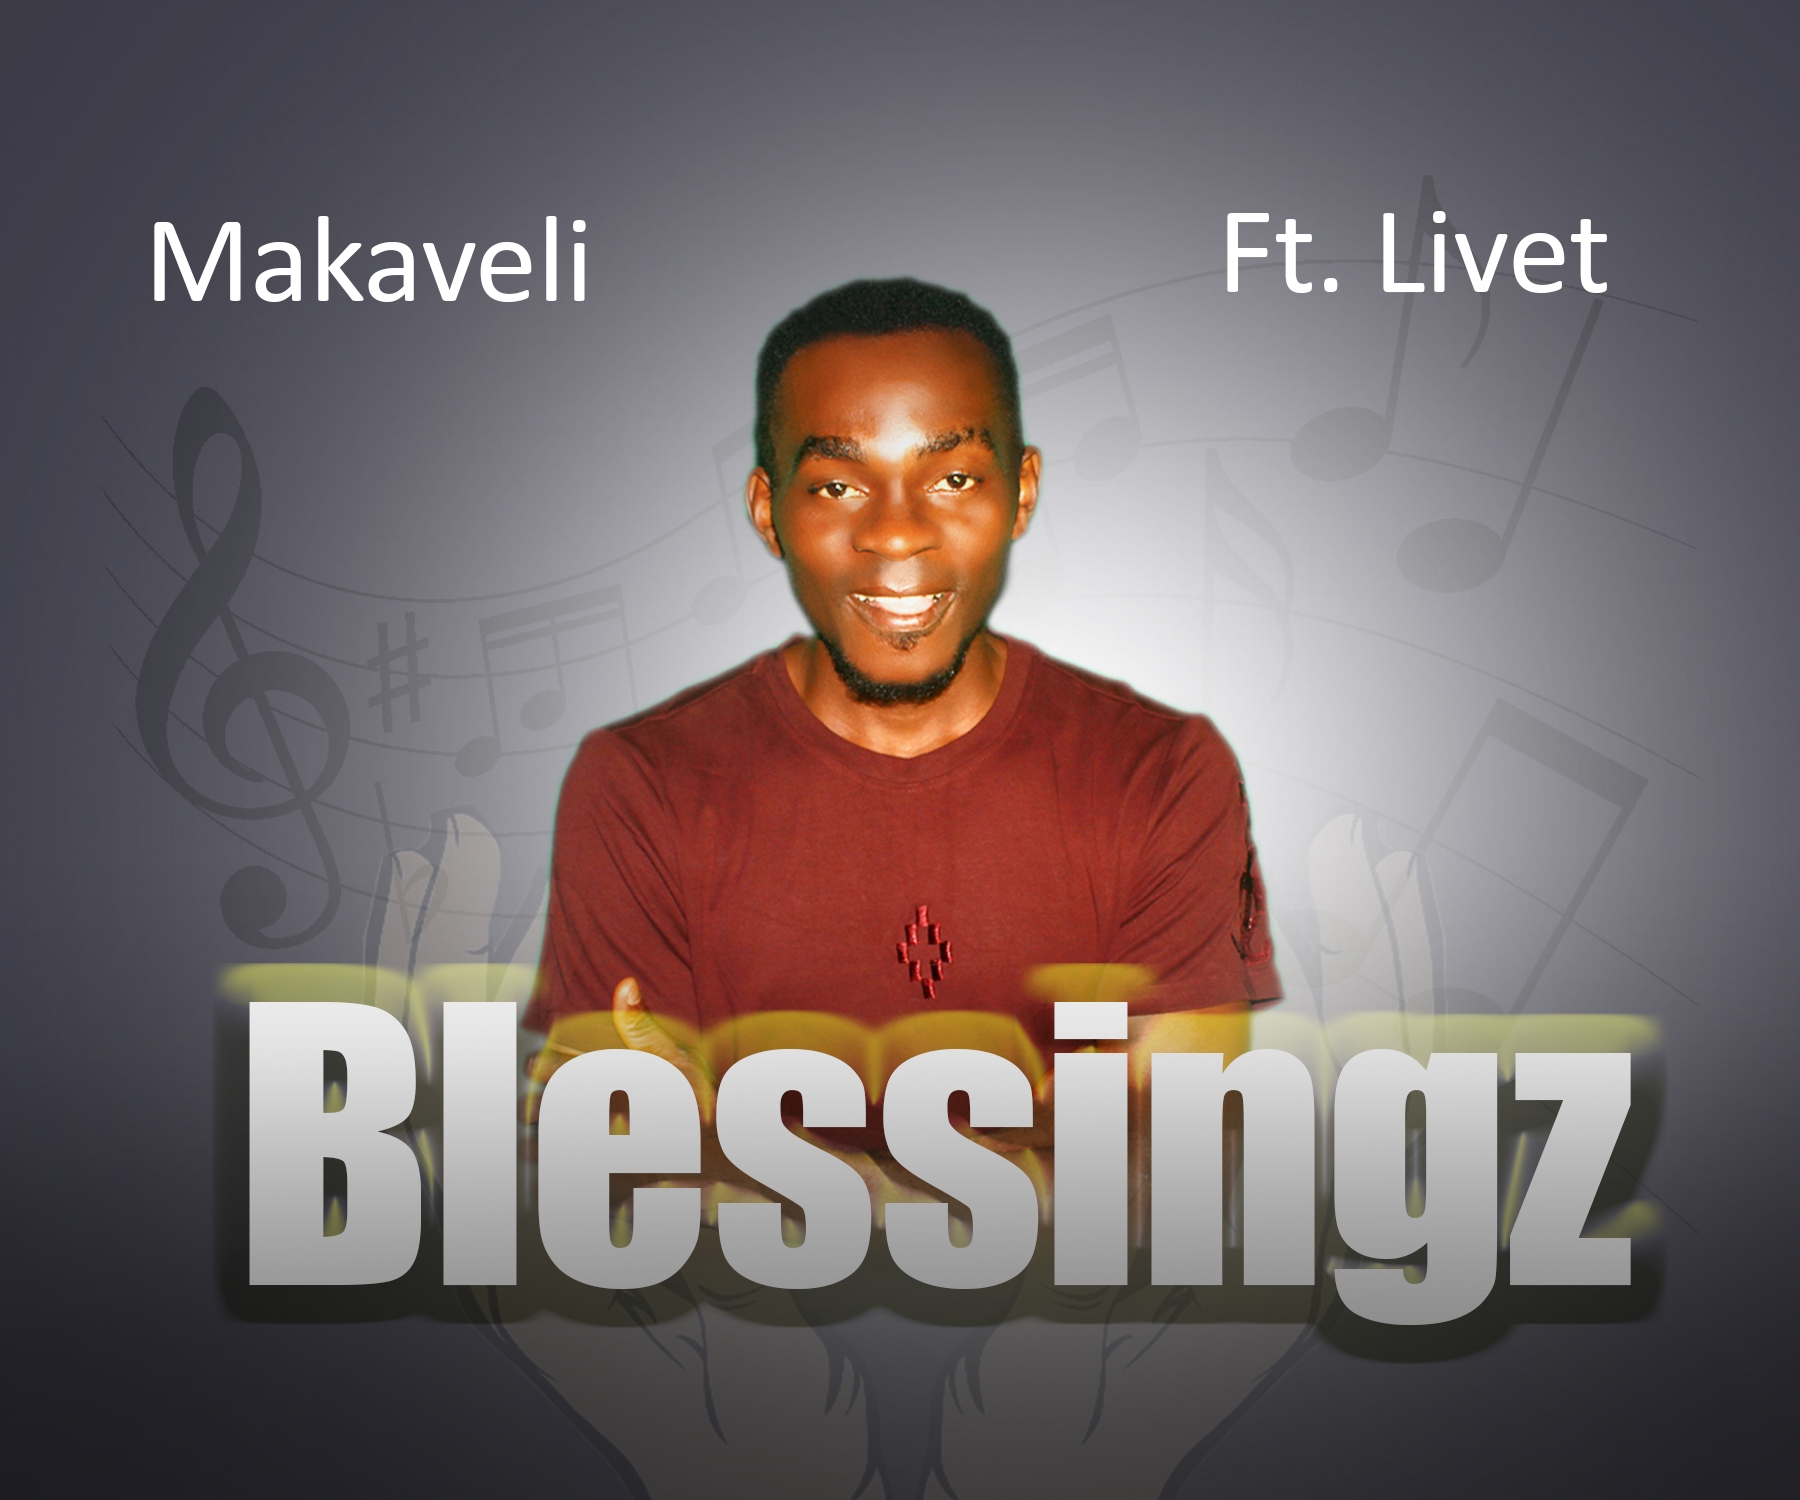 Download Makaveli "Blessingz" Featuring Livet